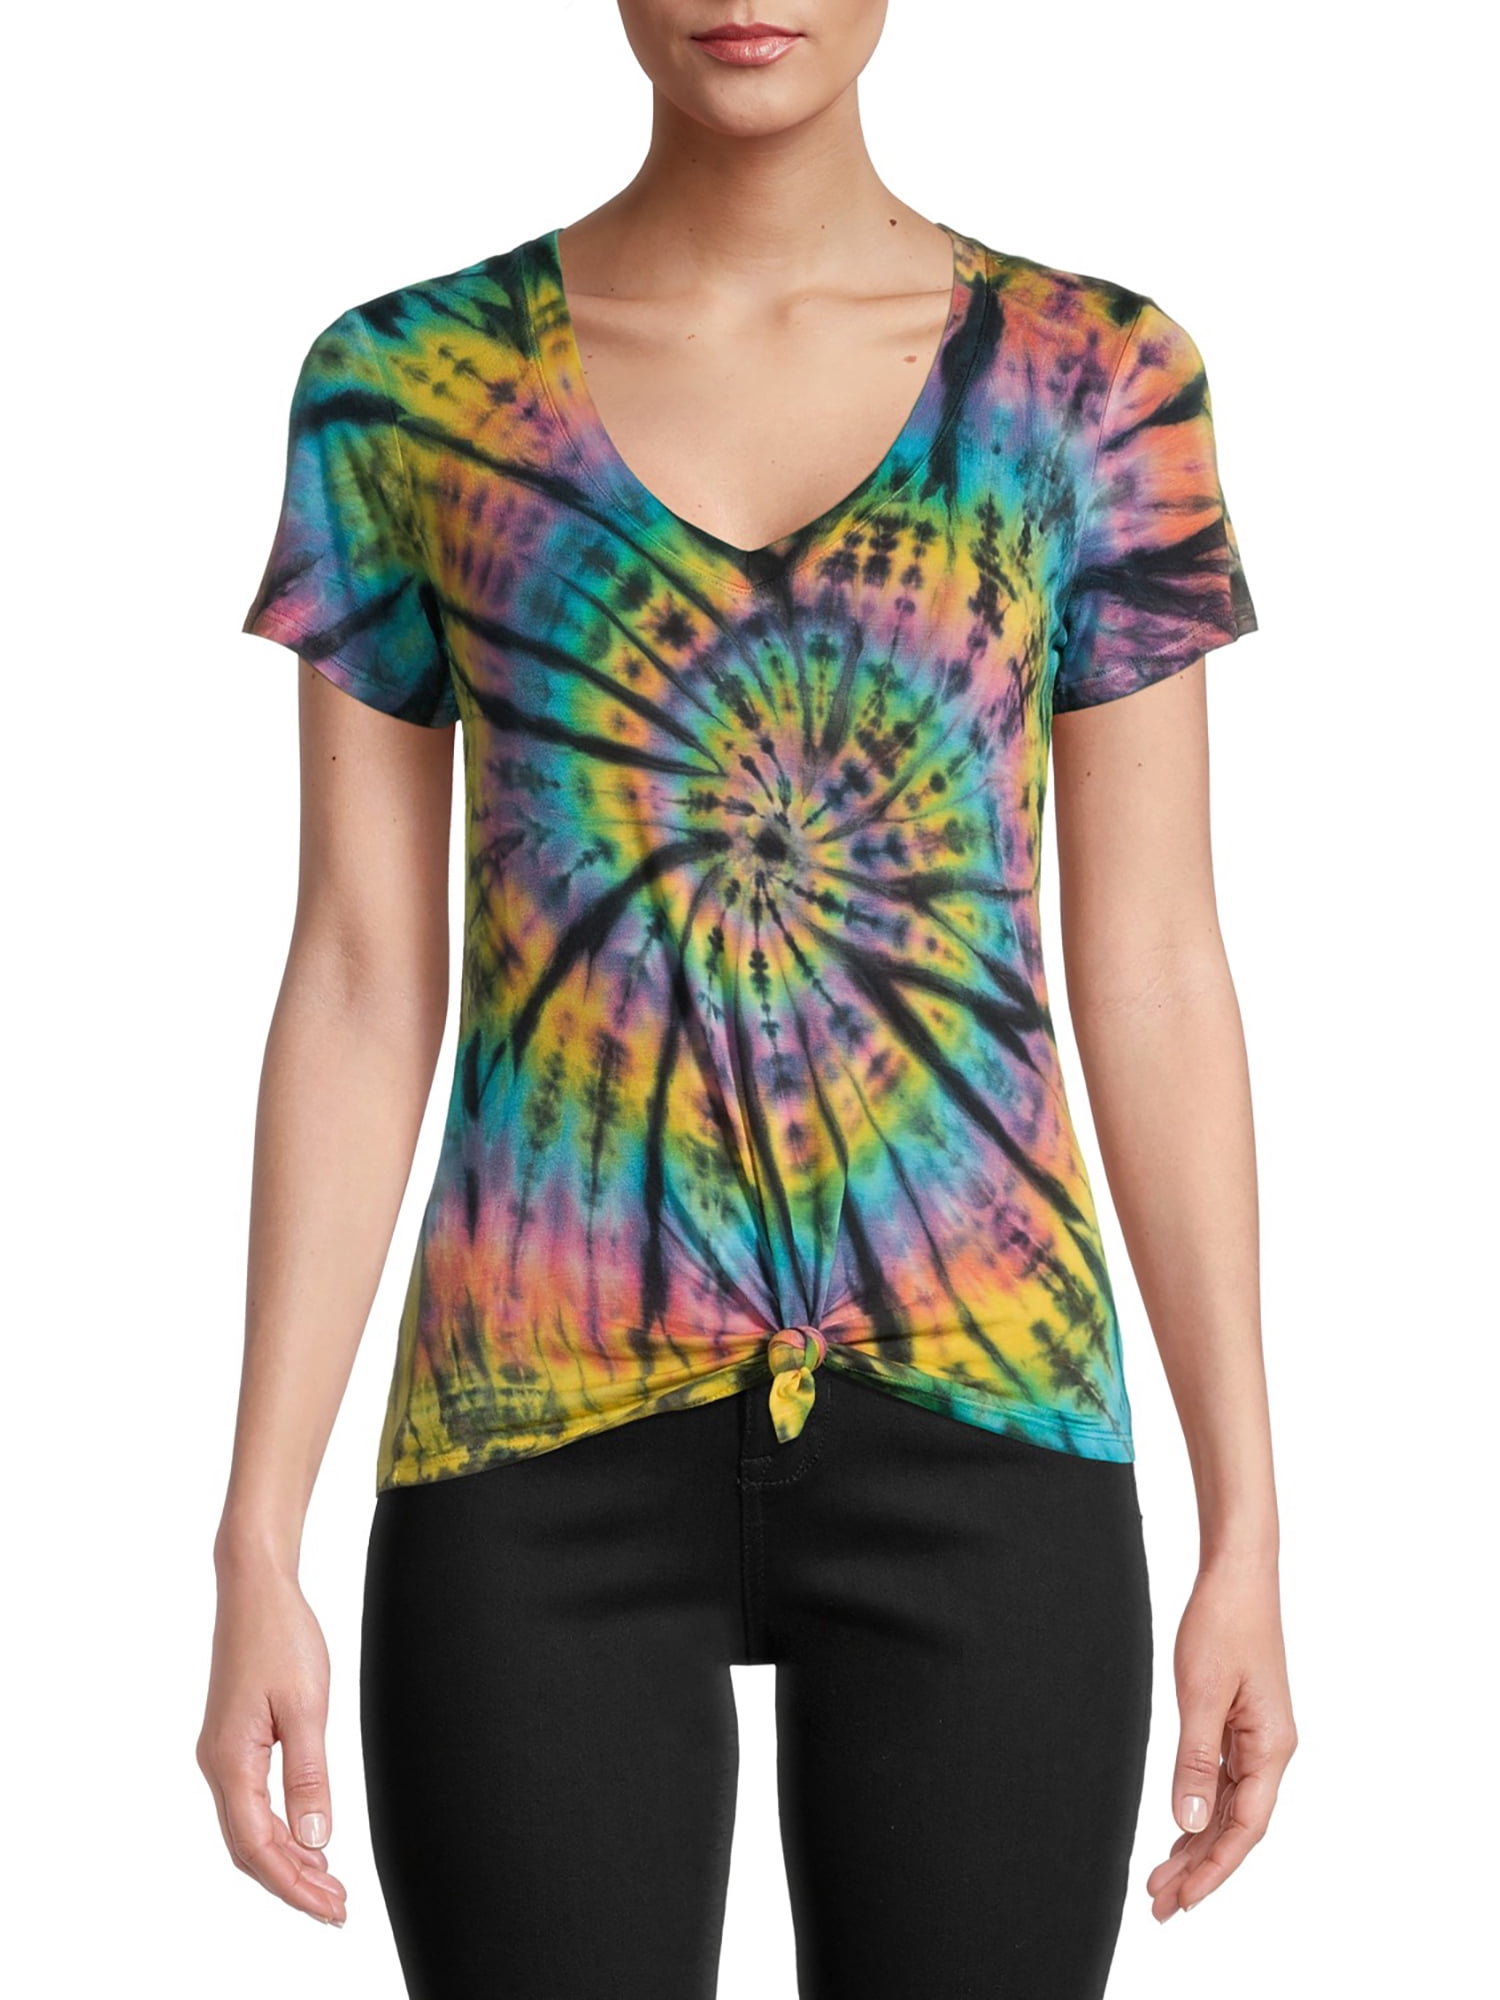 Ladies' S/M Tie Dye V-Neck Cover-Up Hand Tied and Ice Dyed One of a Kind Piece of Tie Dye Art